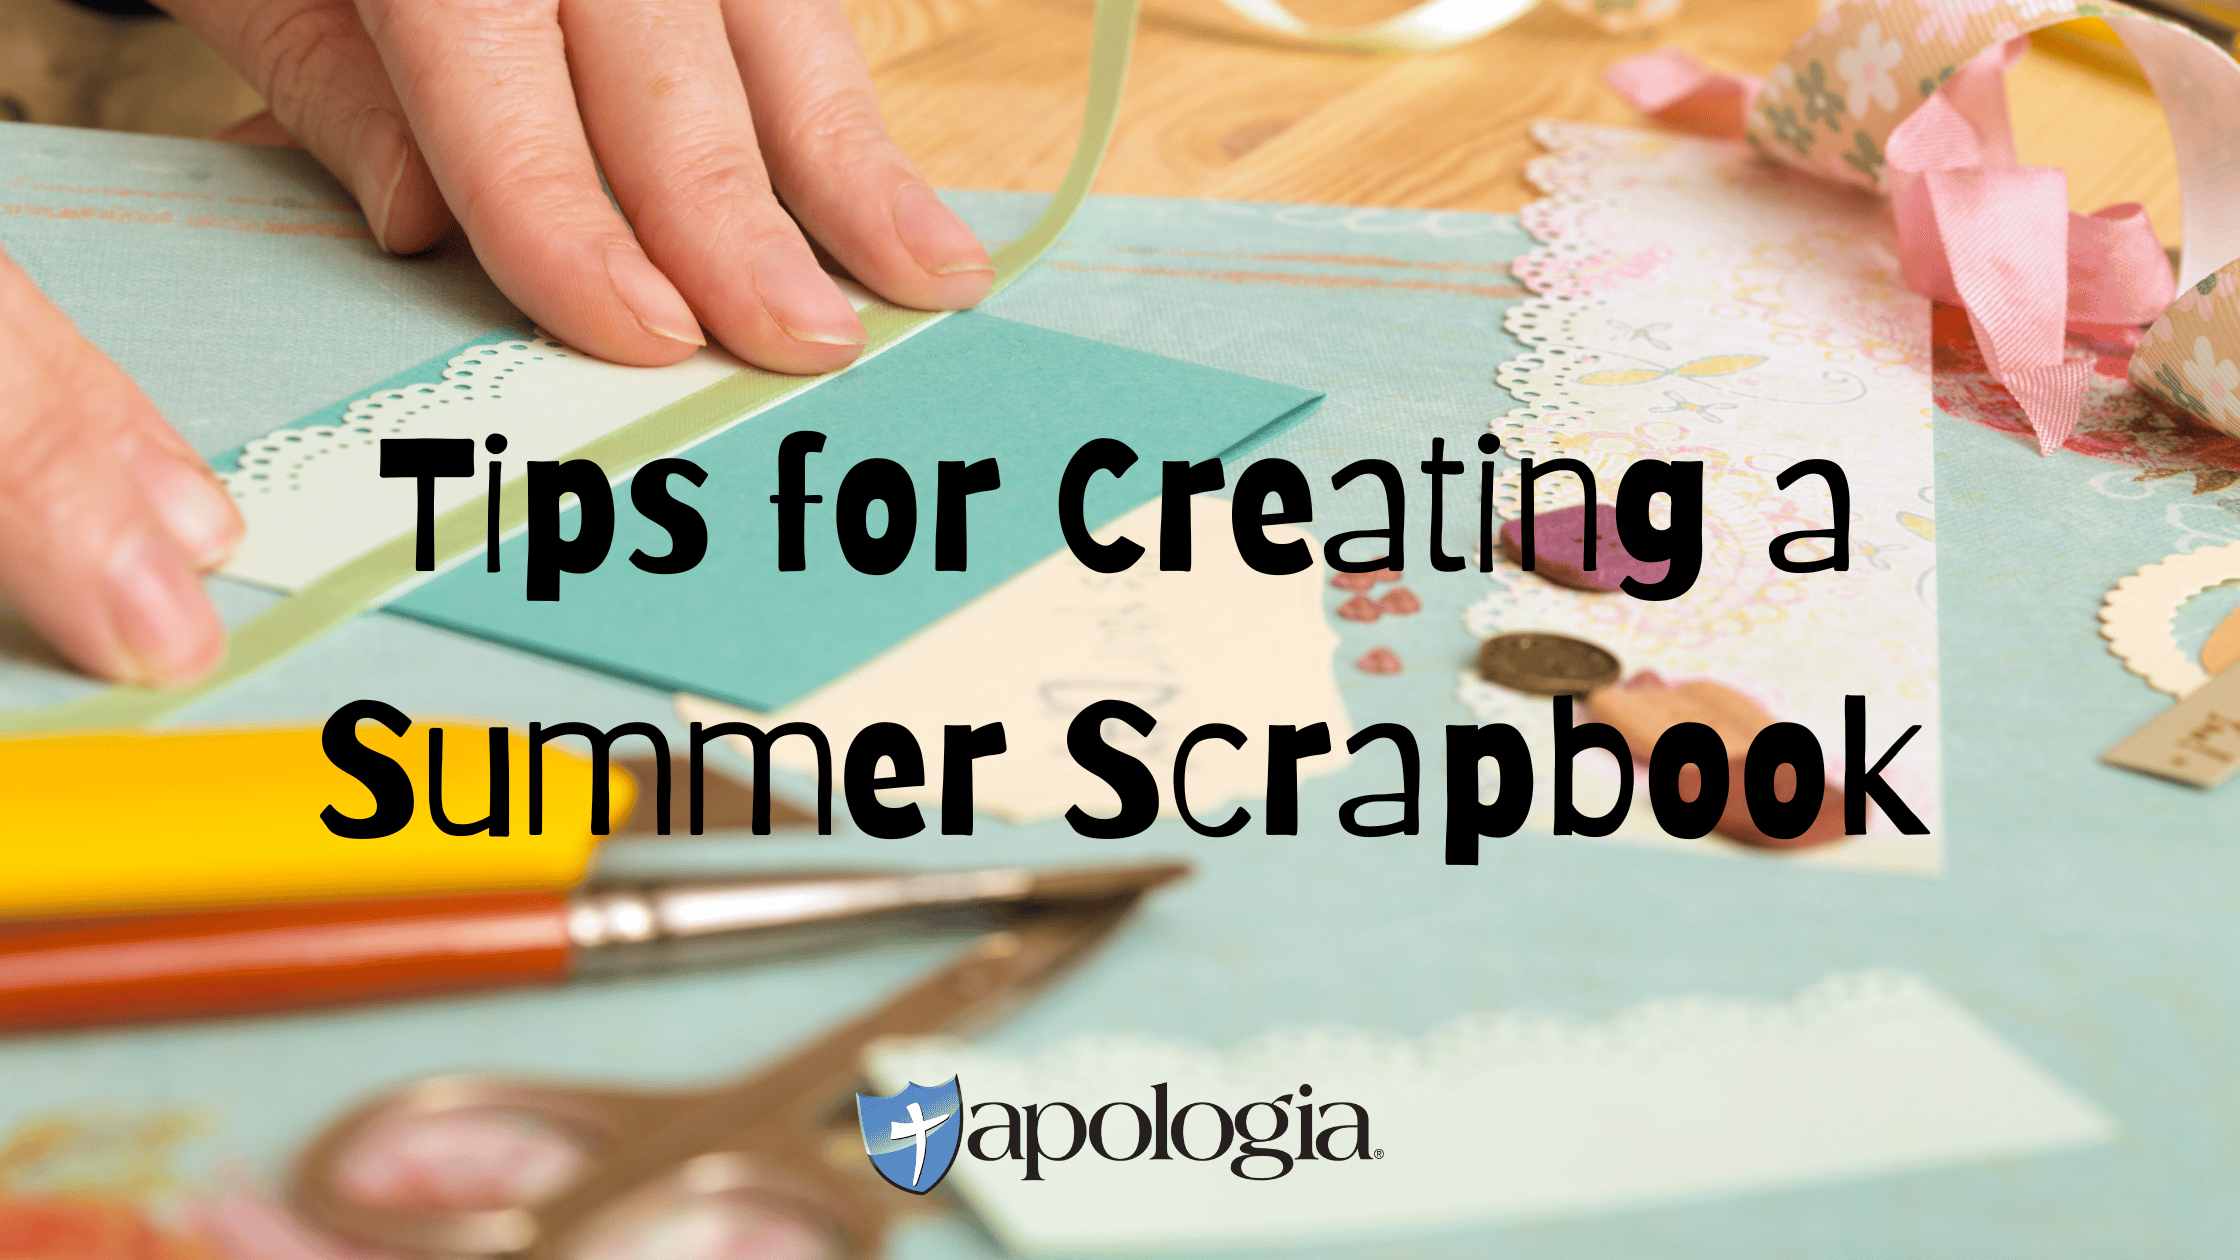 Tips for Creating a Summer Scrapbook